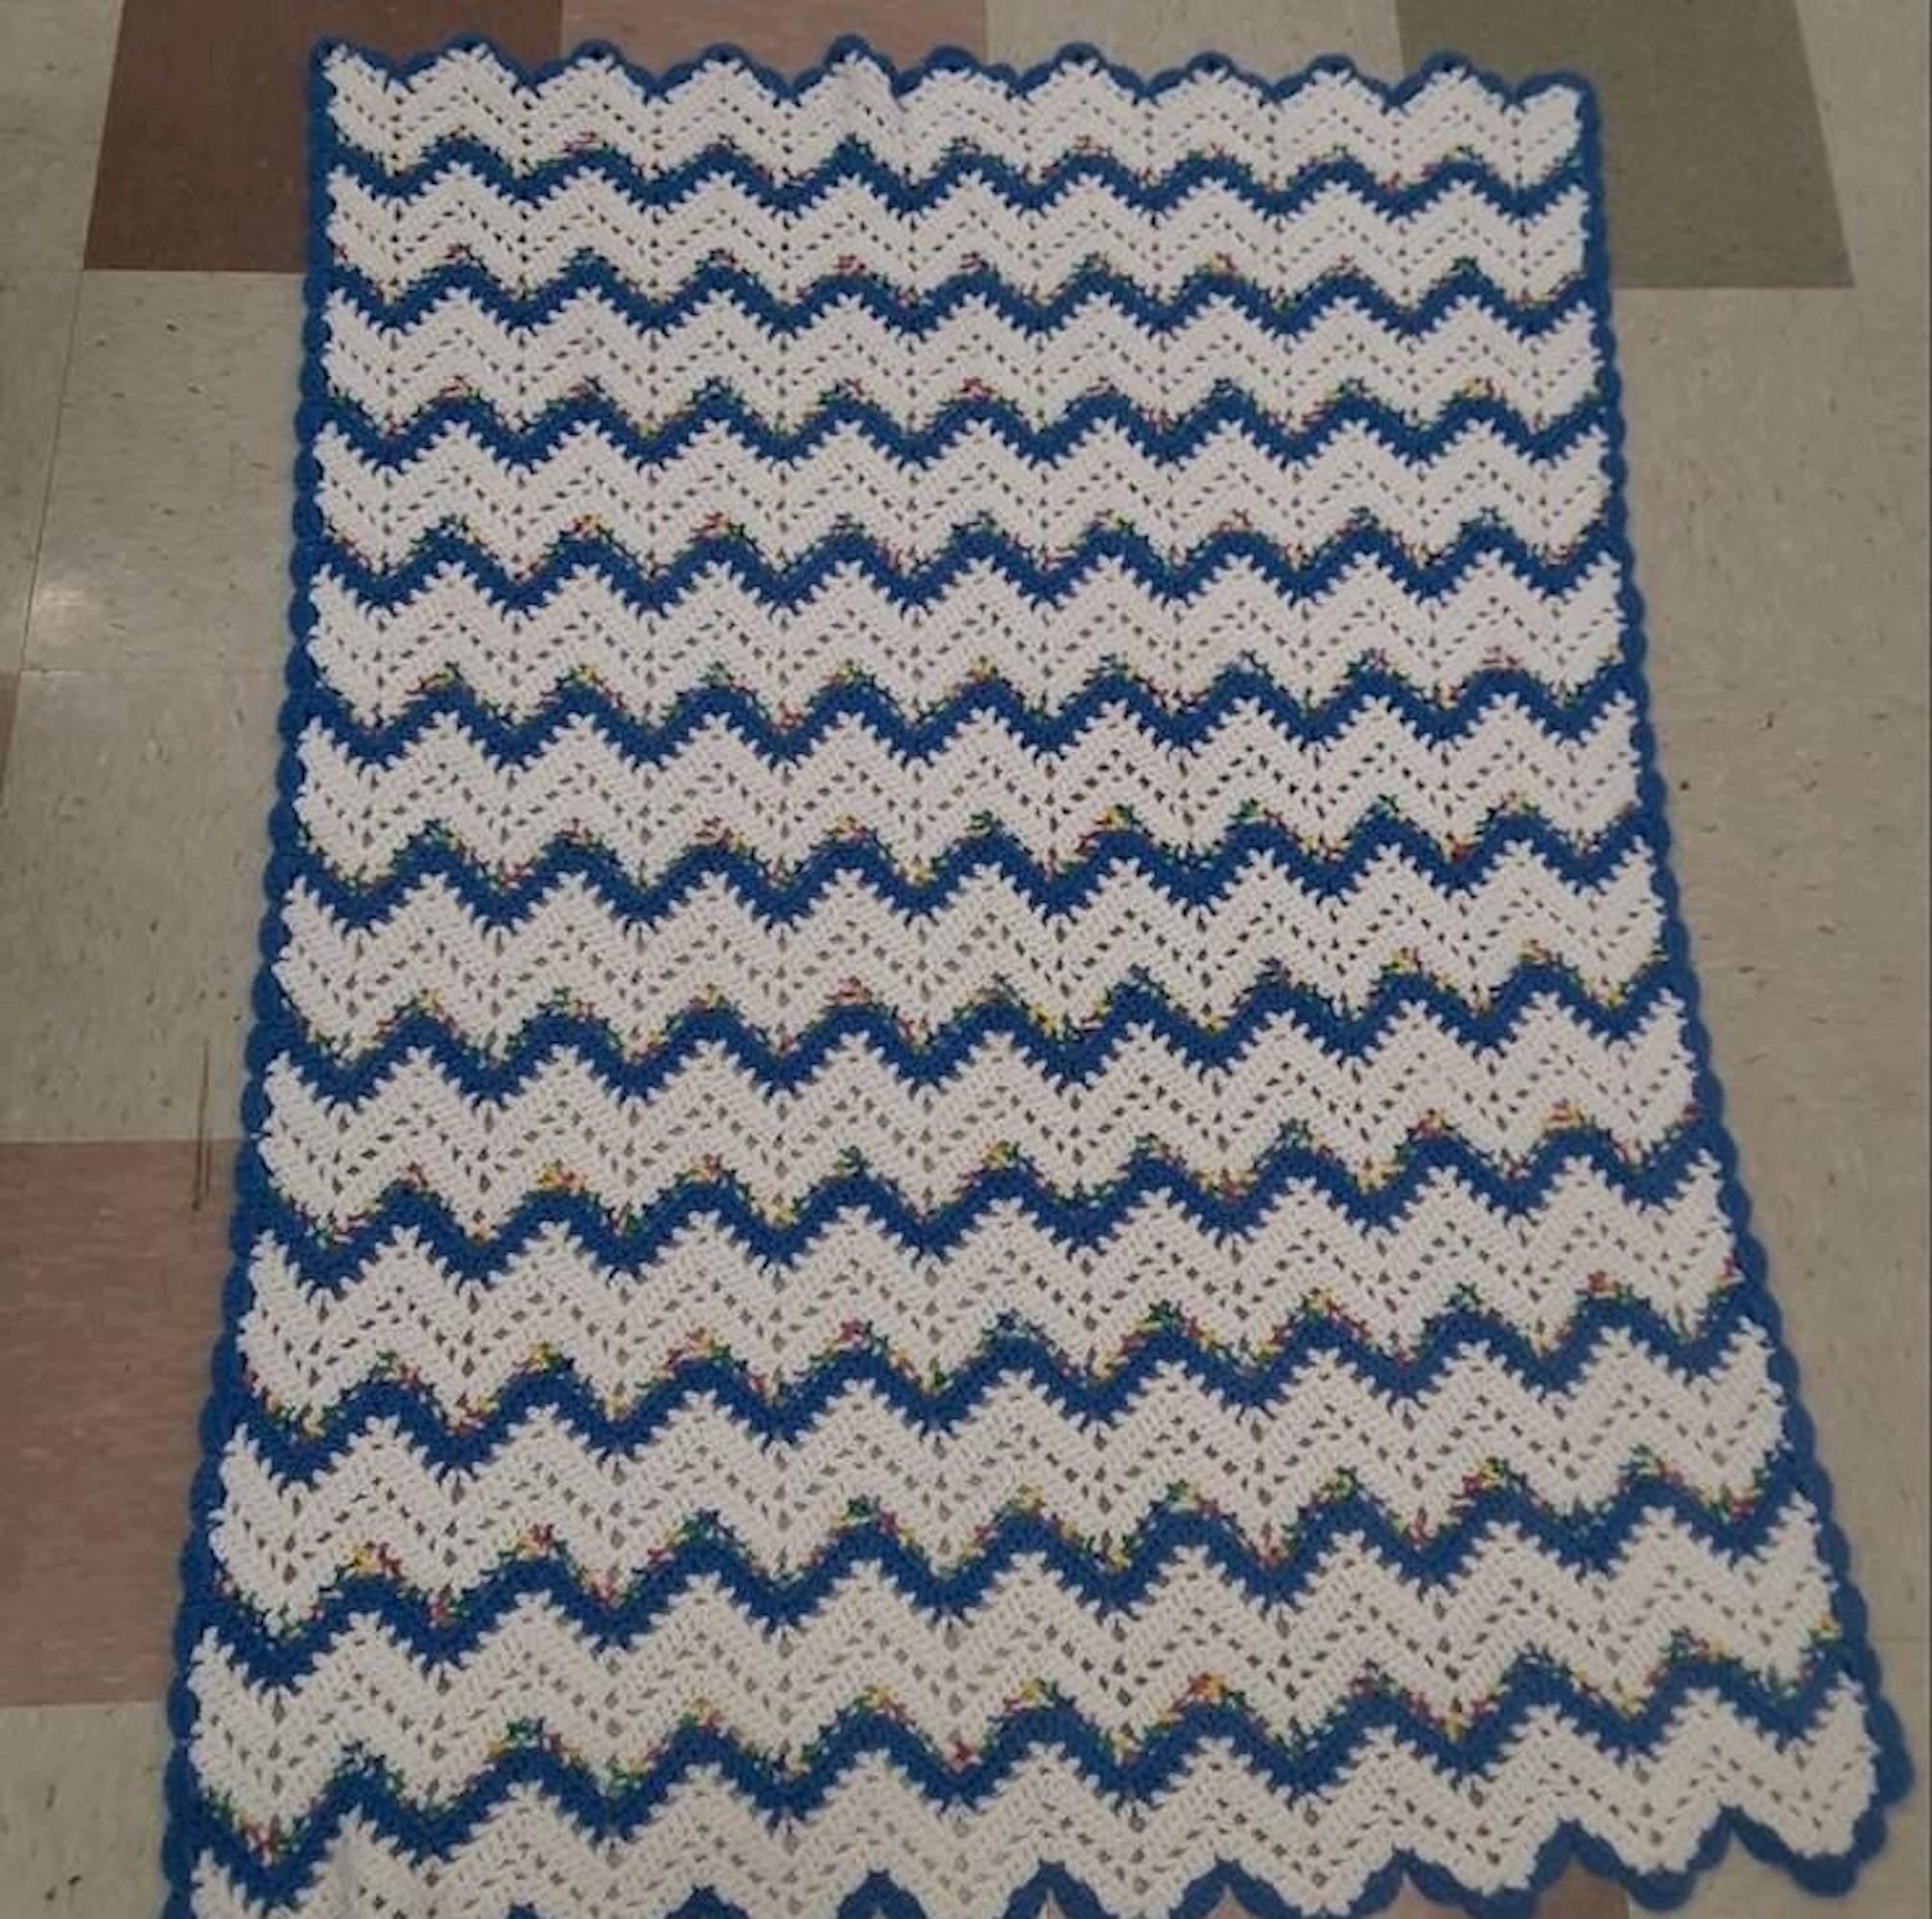 1988 Hand-Knit White, Blue & Yellow Zig-zag Afghan Throw (35\